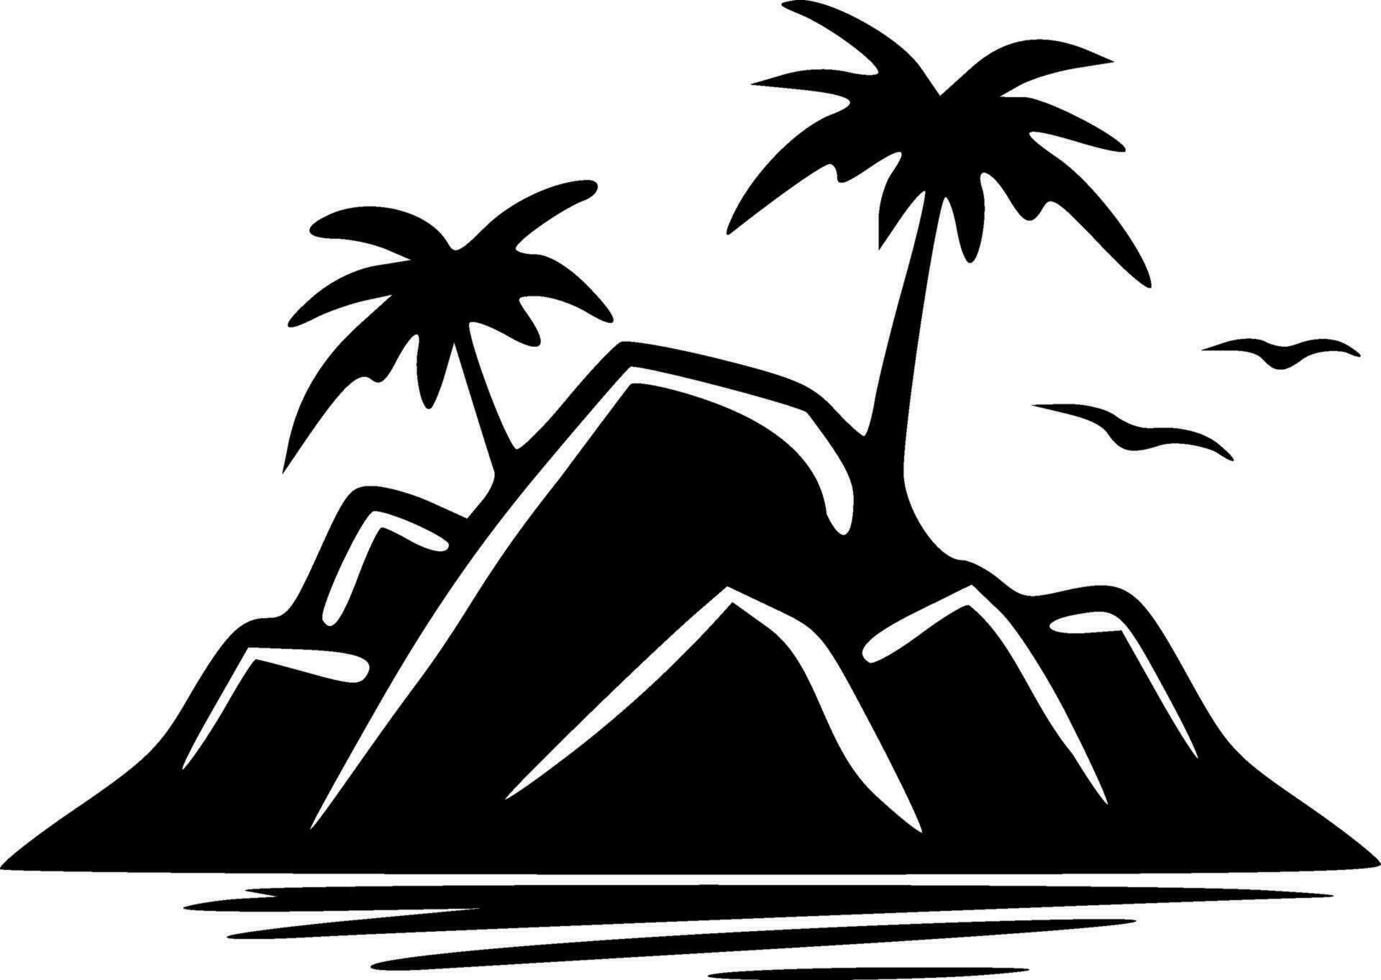 Small island with palm trees with birds flying isolated silhouette vector illustration